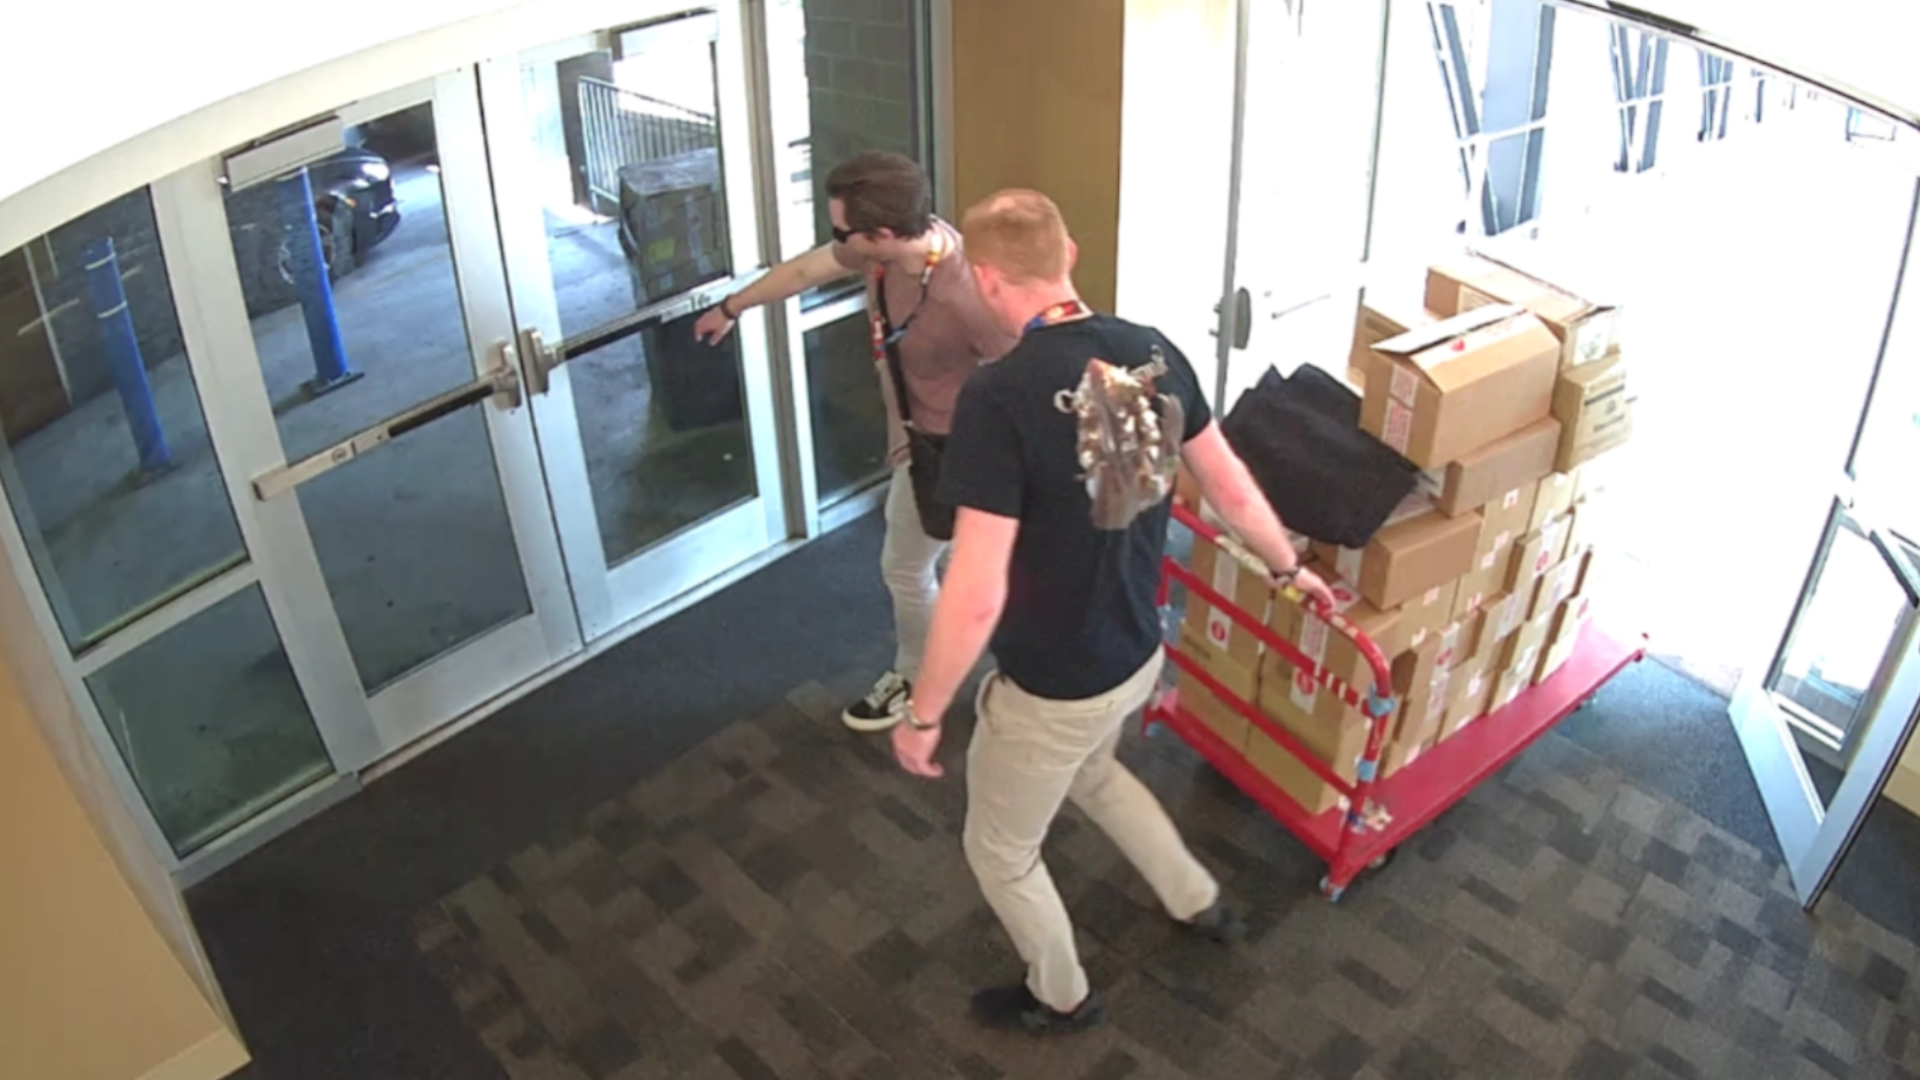 Two potential suspects in the Gen Con 2023 card heist wheel a pallet of cards out of the building. One is wearing what might be 